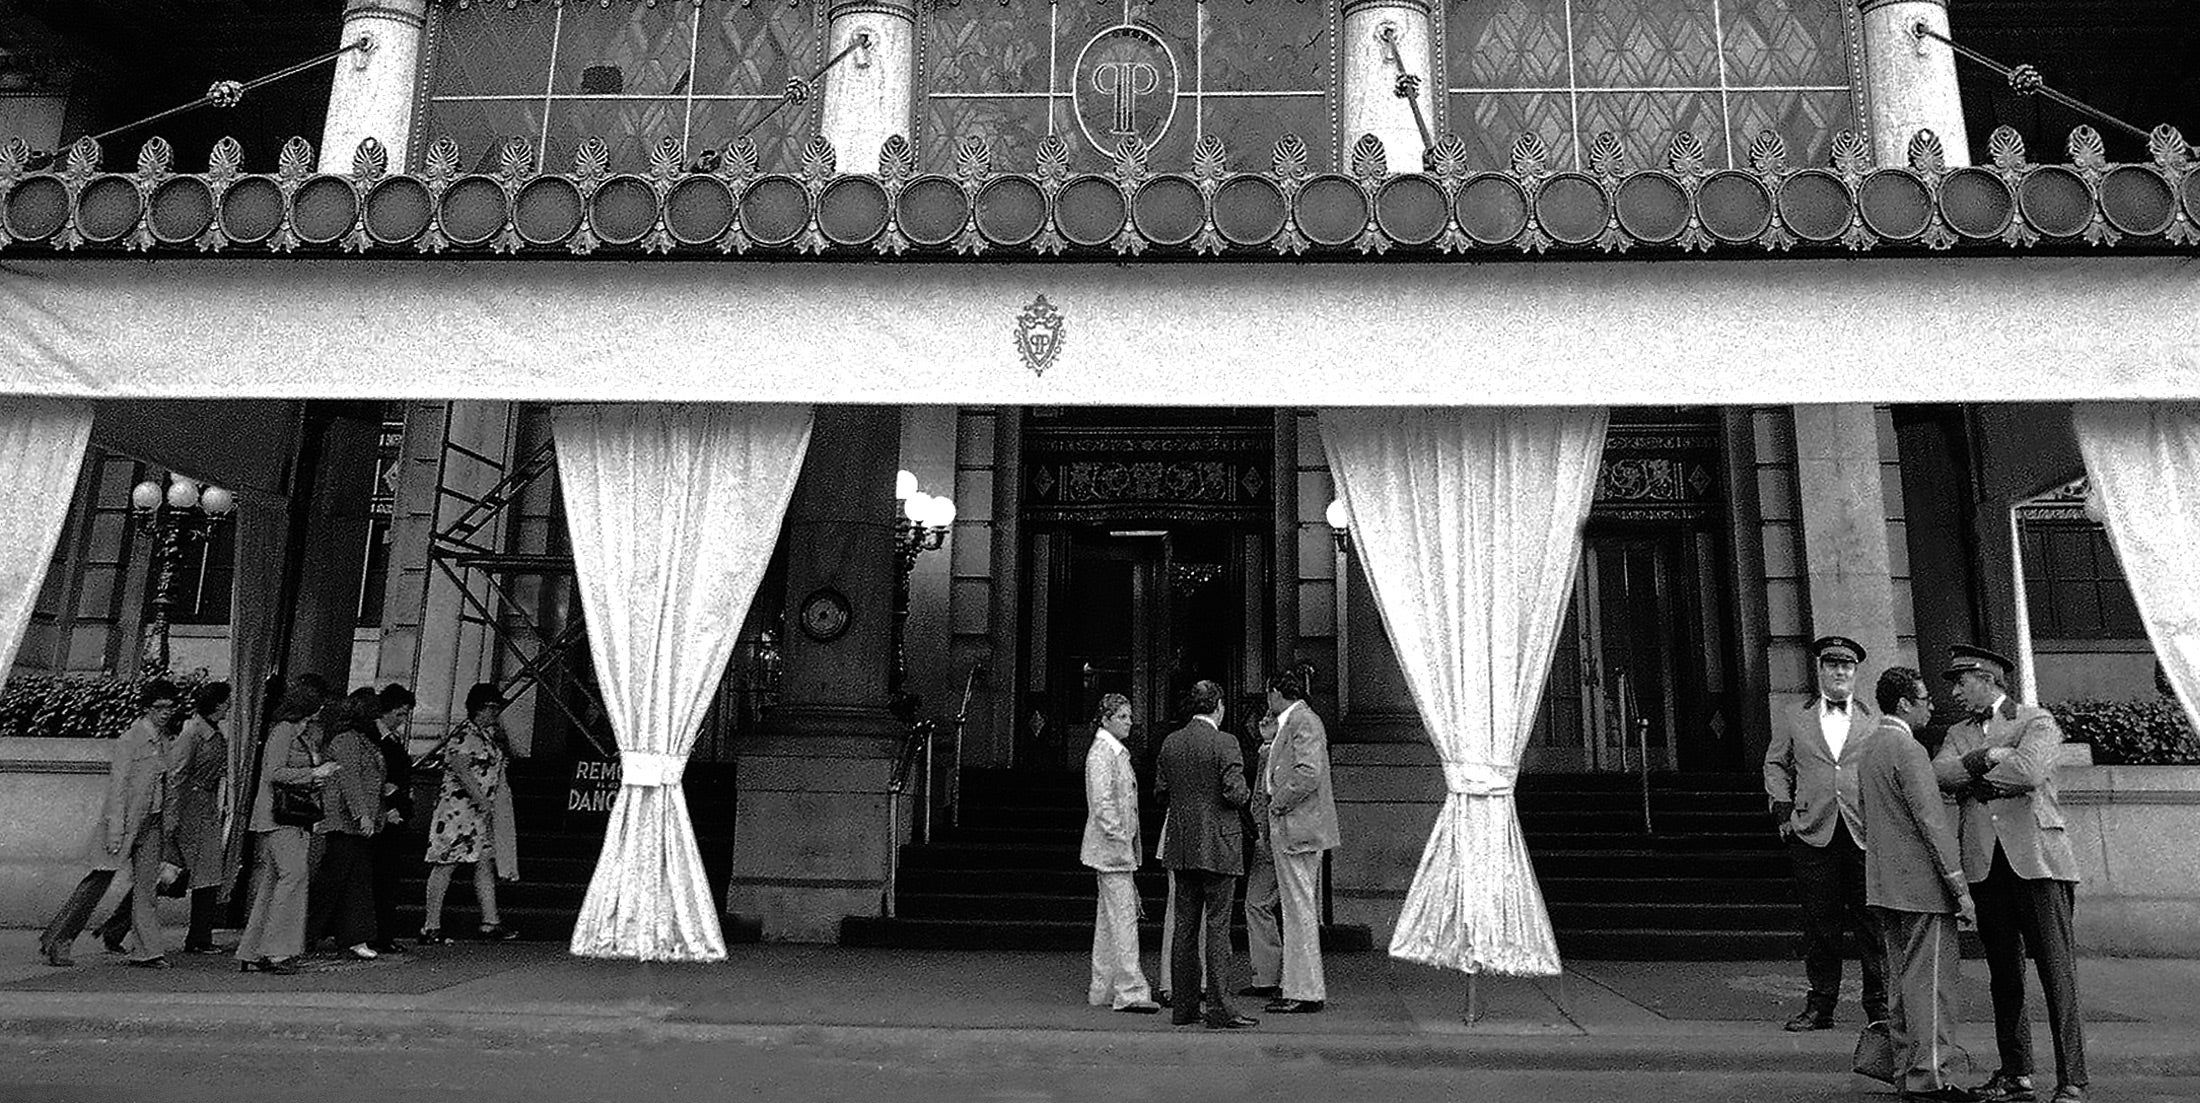 Three groups of people stand out front of the entrance of the Plaza Hotel in 1974.